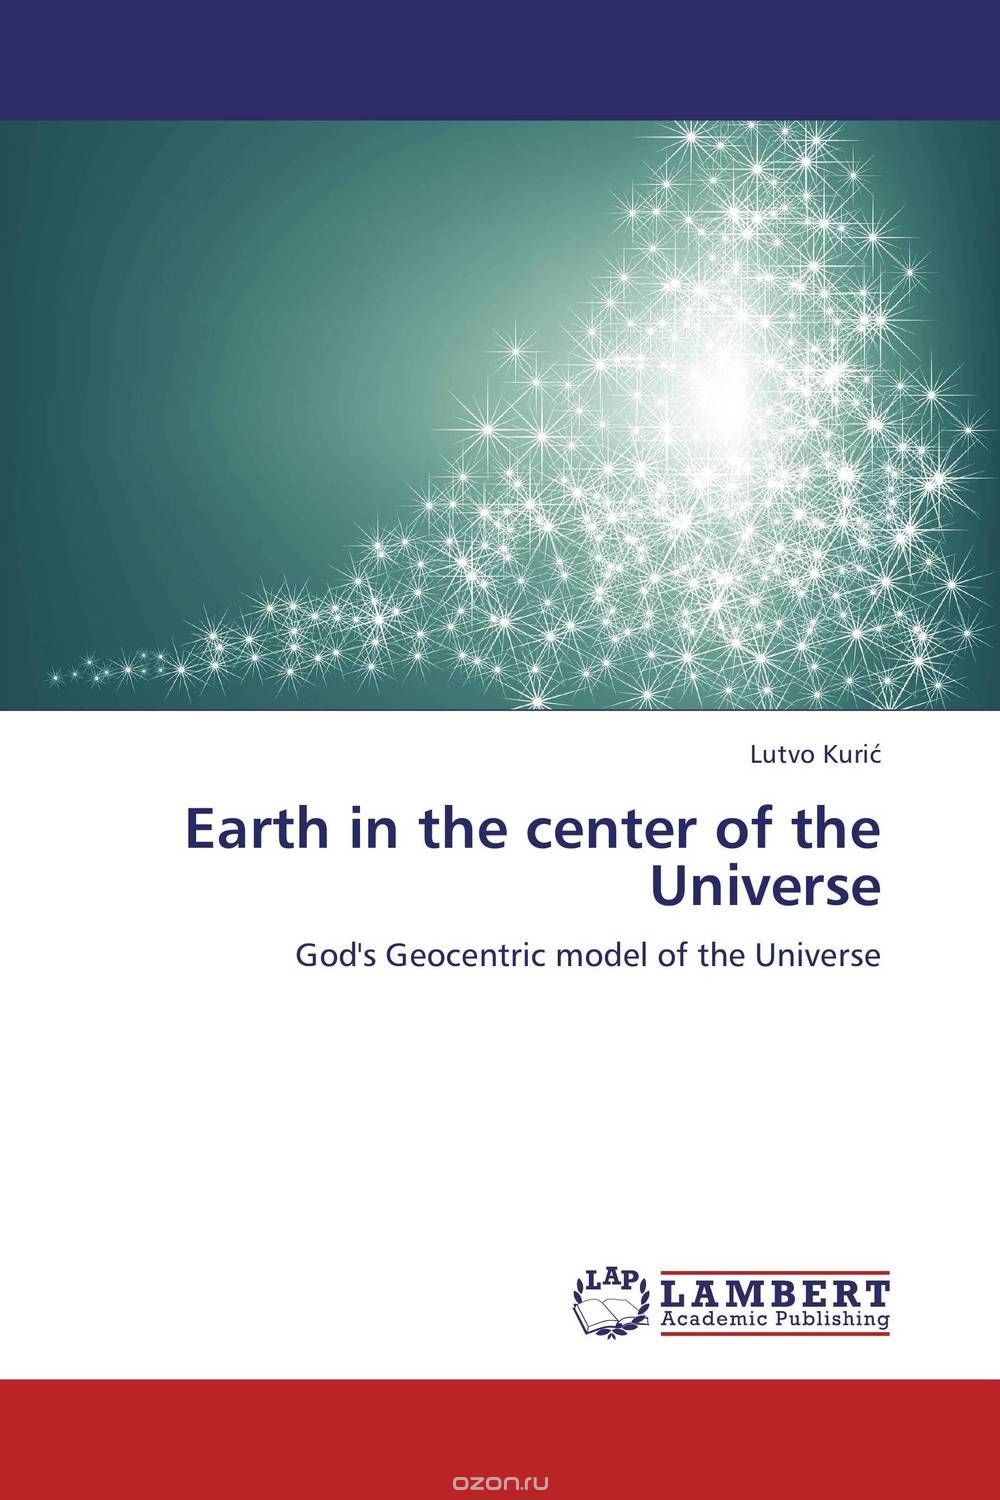 Скачать книгу "Earth in the center of the Universe"